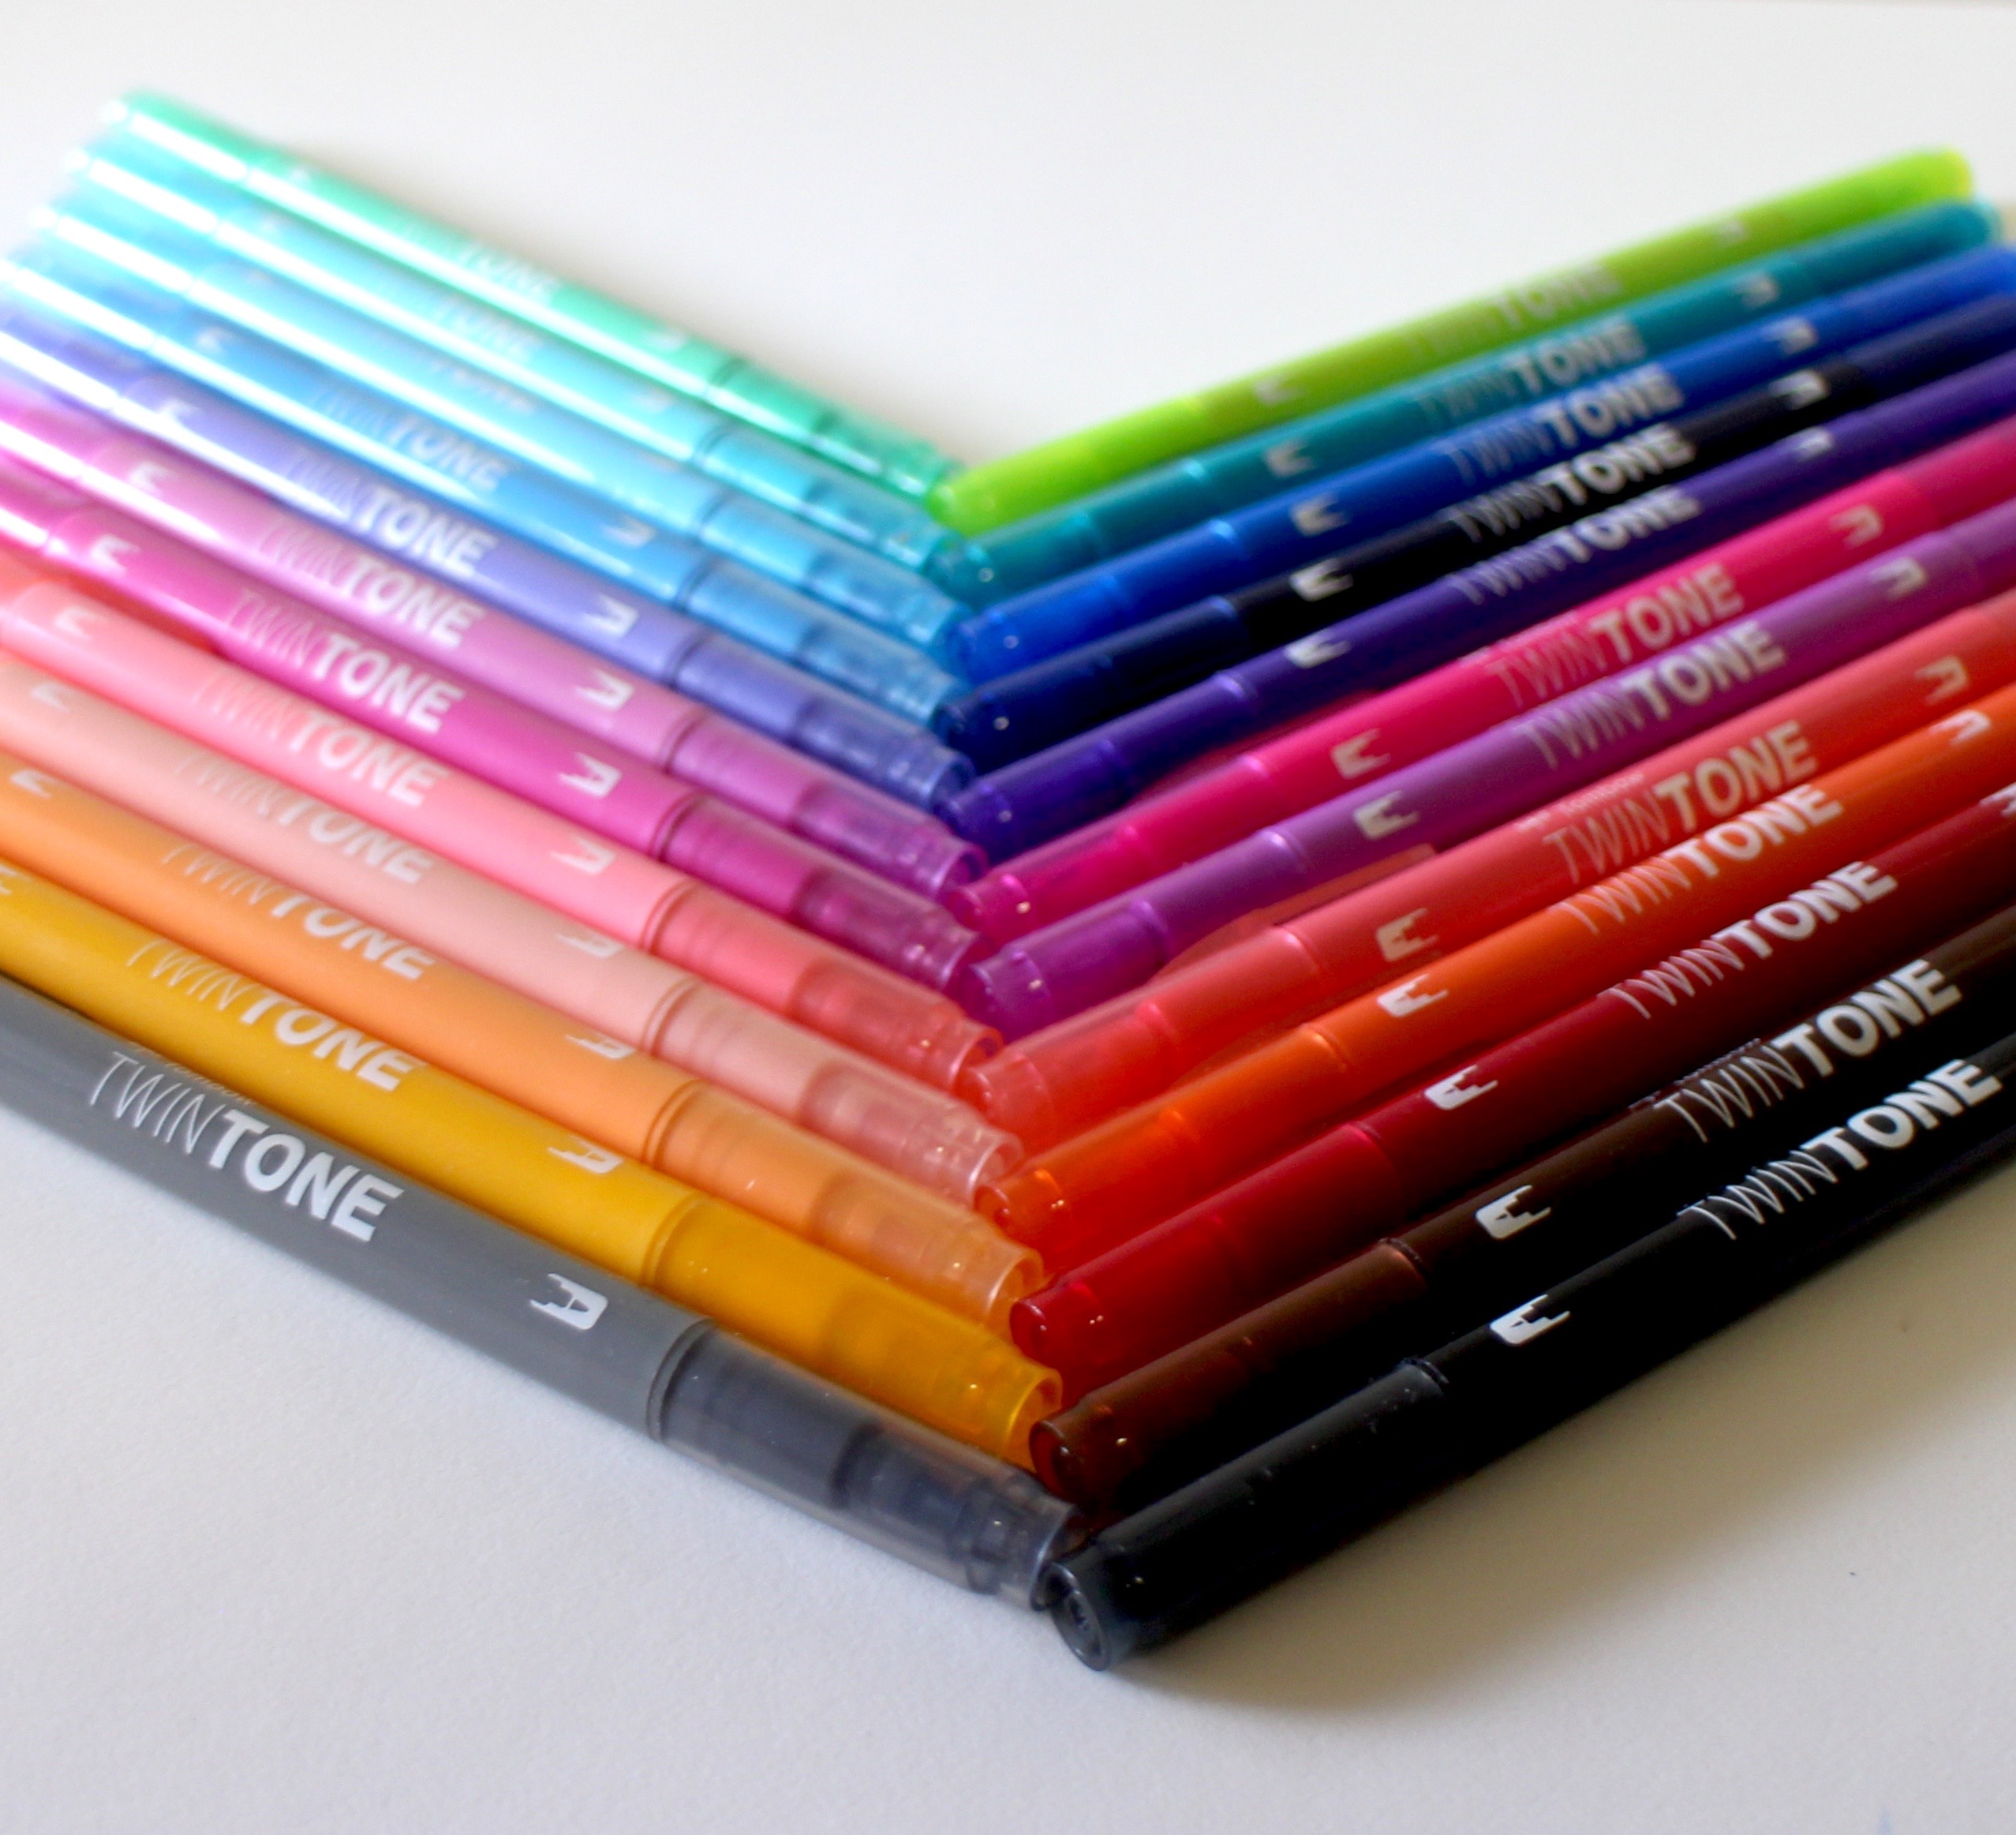 New addition to your Tombow coloring system